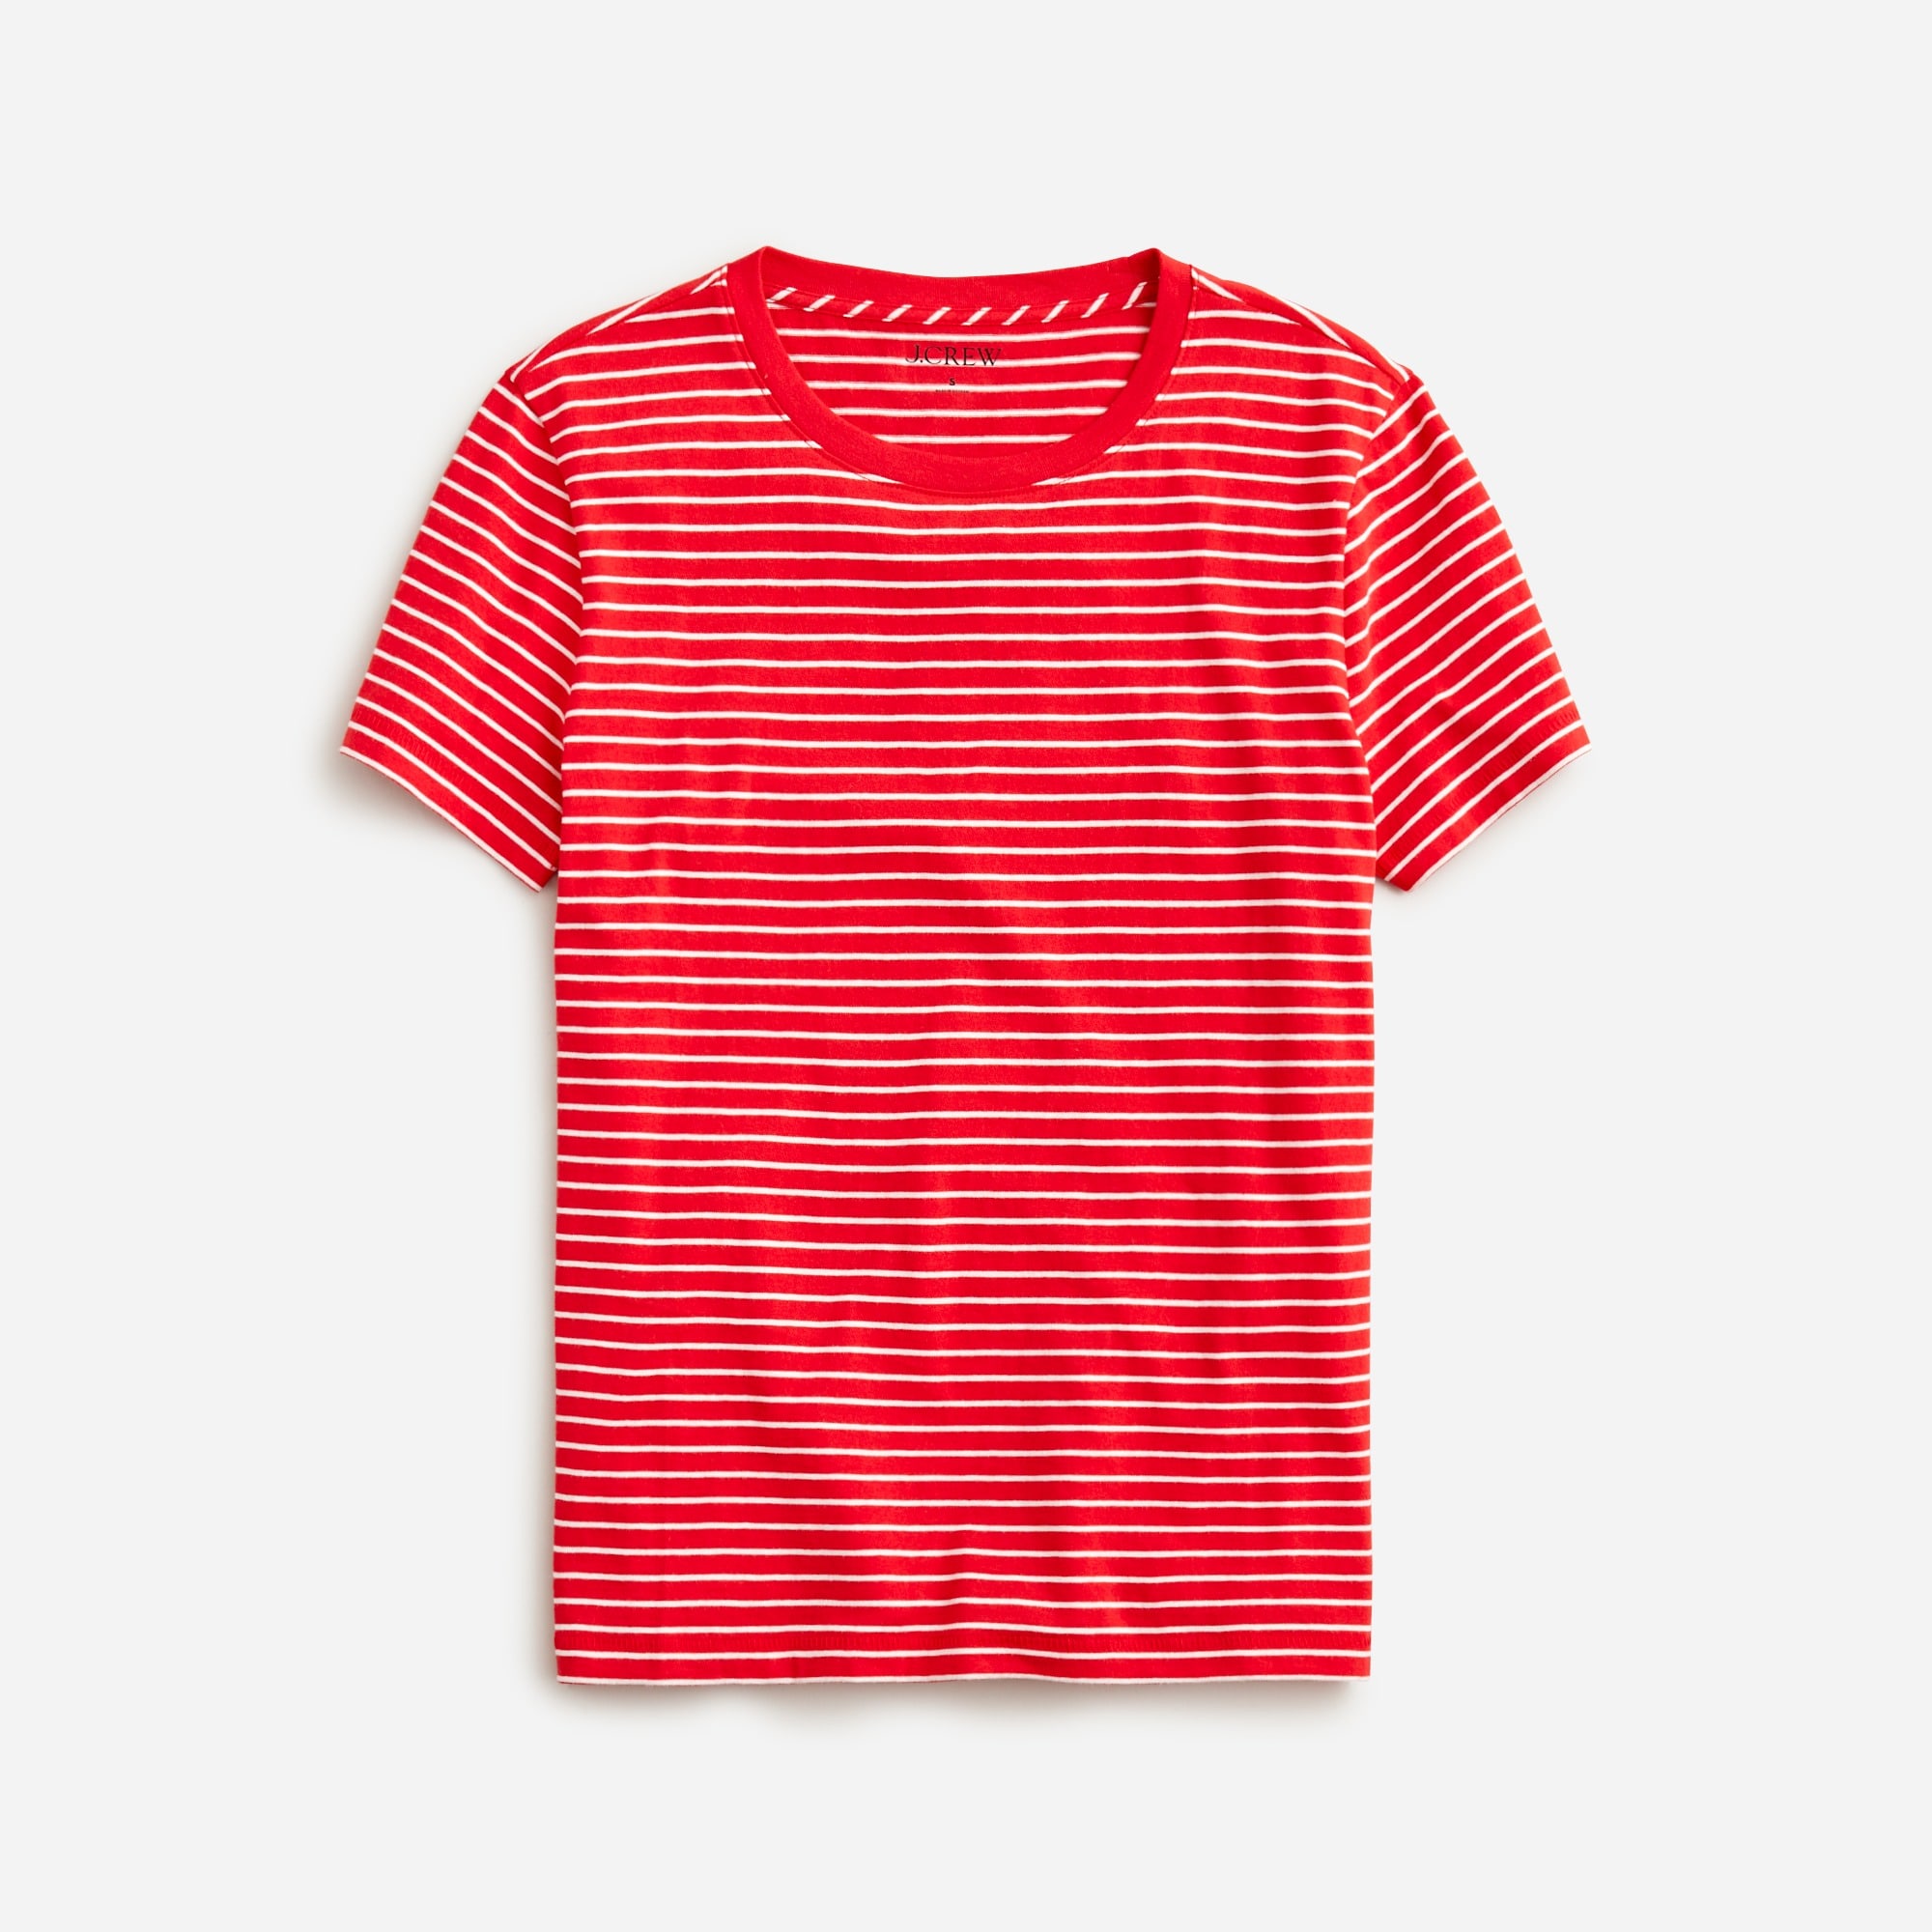  Vintage jersey classic-fit crewneck T-shirt in stripe